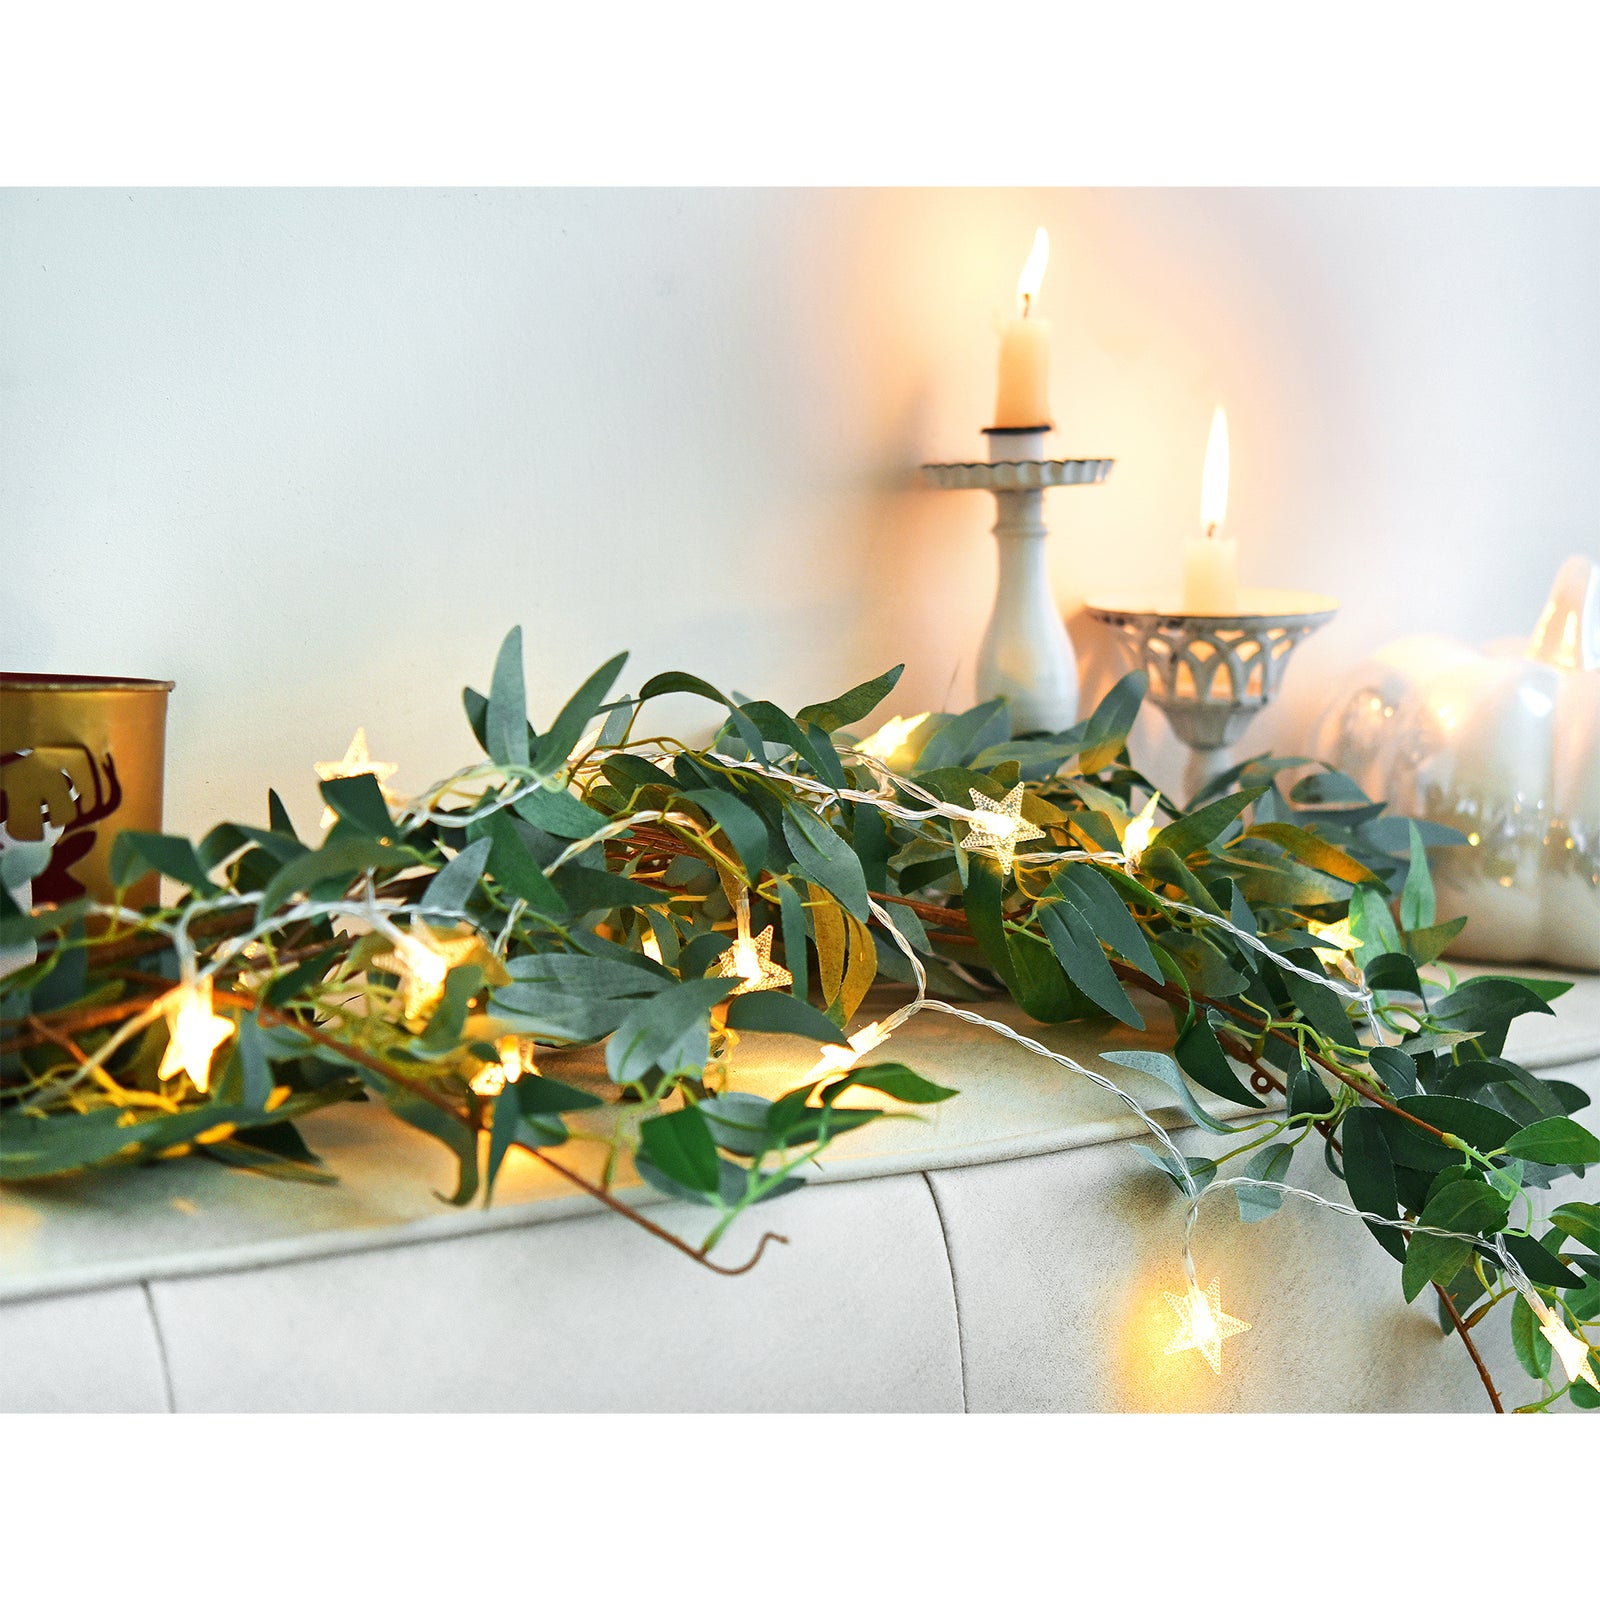 2 Mix Rustic Willow Garlands, Bendable Artificial Greenery Vine Leaves for Wedding Home Decoration with 33 Feet Star String Lights (Battery-Powered)